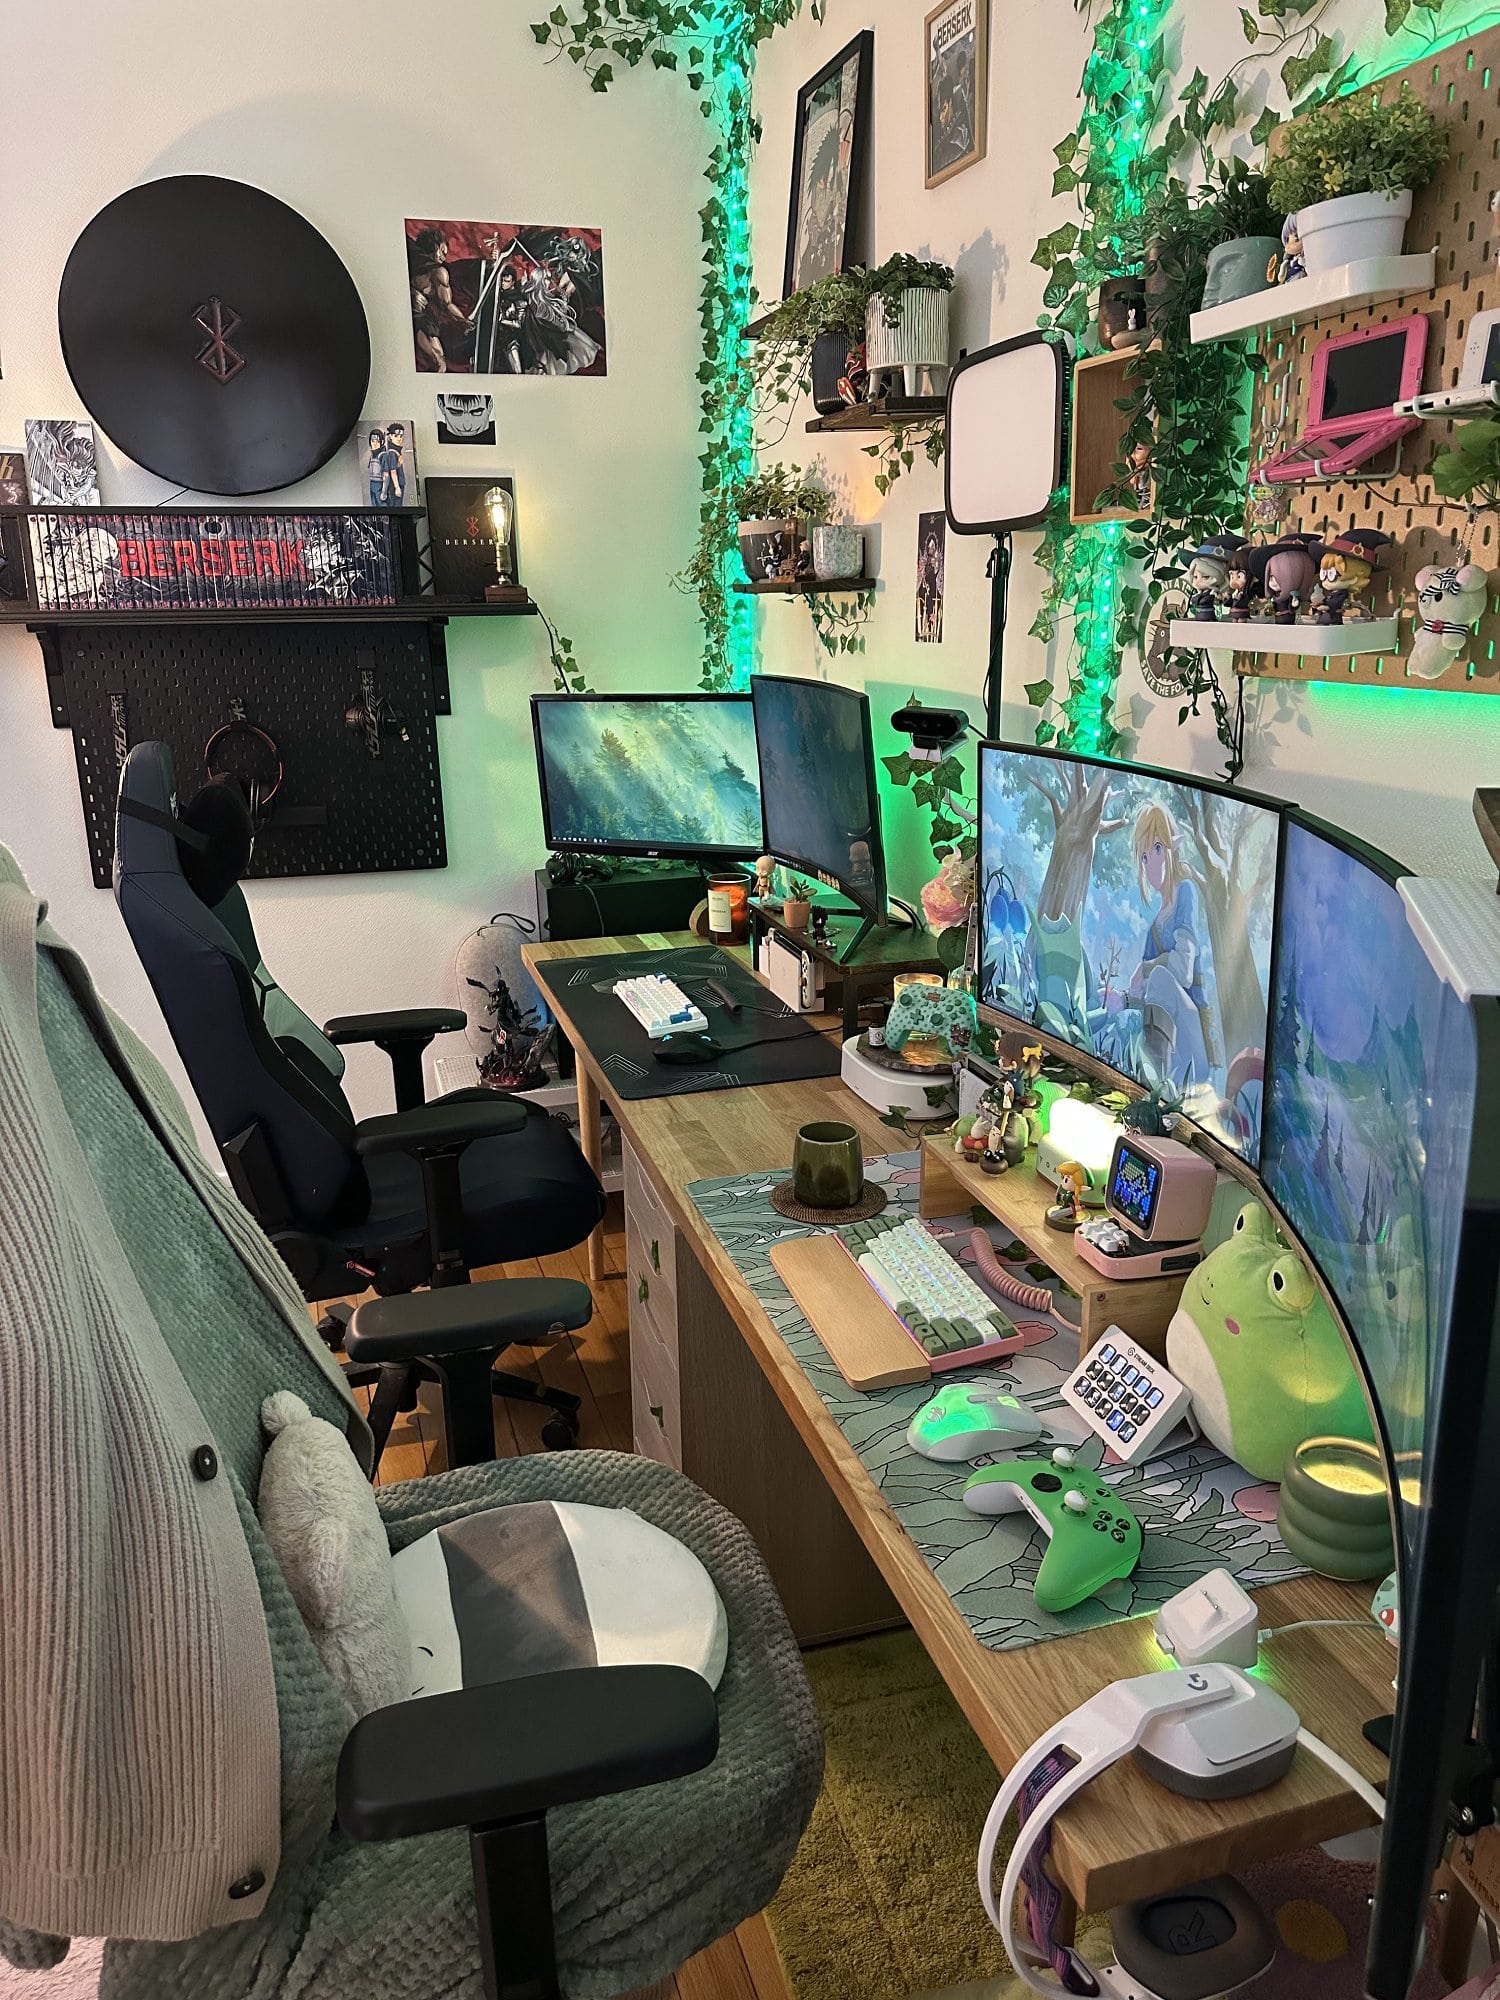 A shared gaming desk setup inspired by Japanese culture